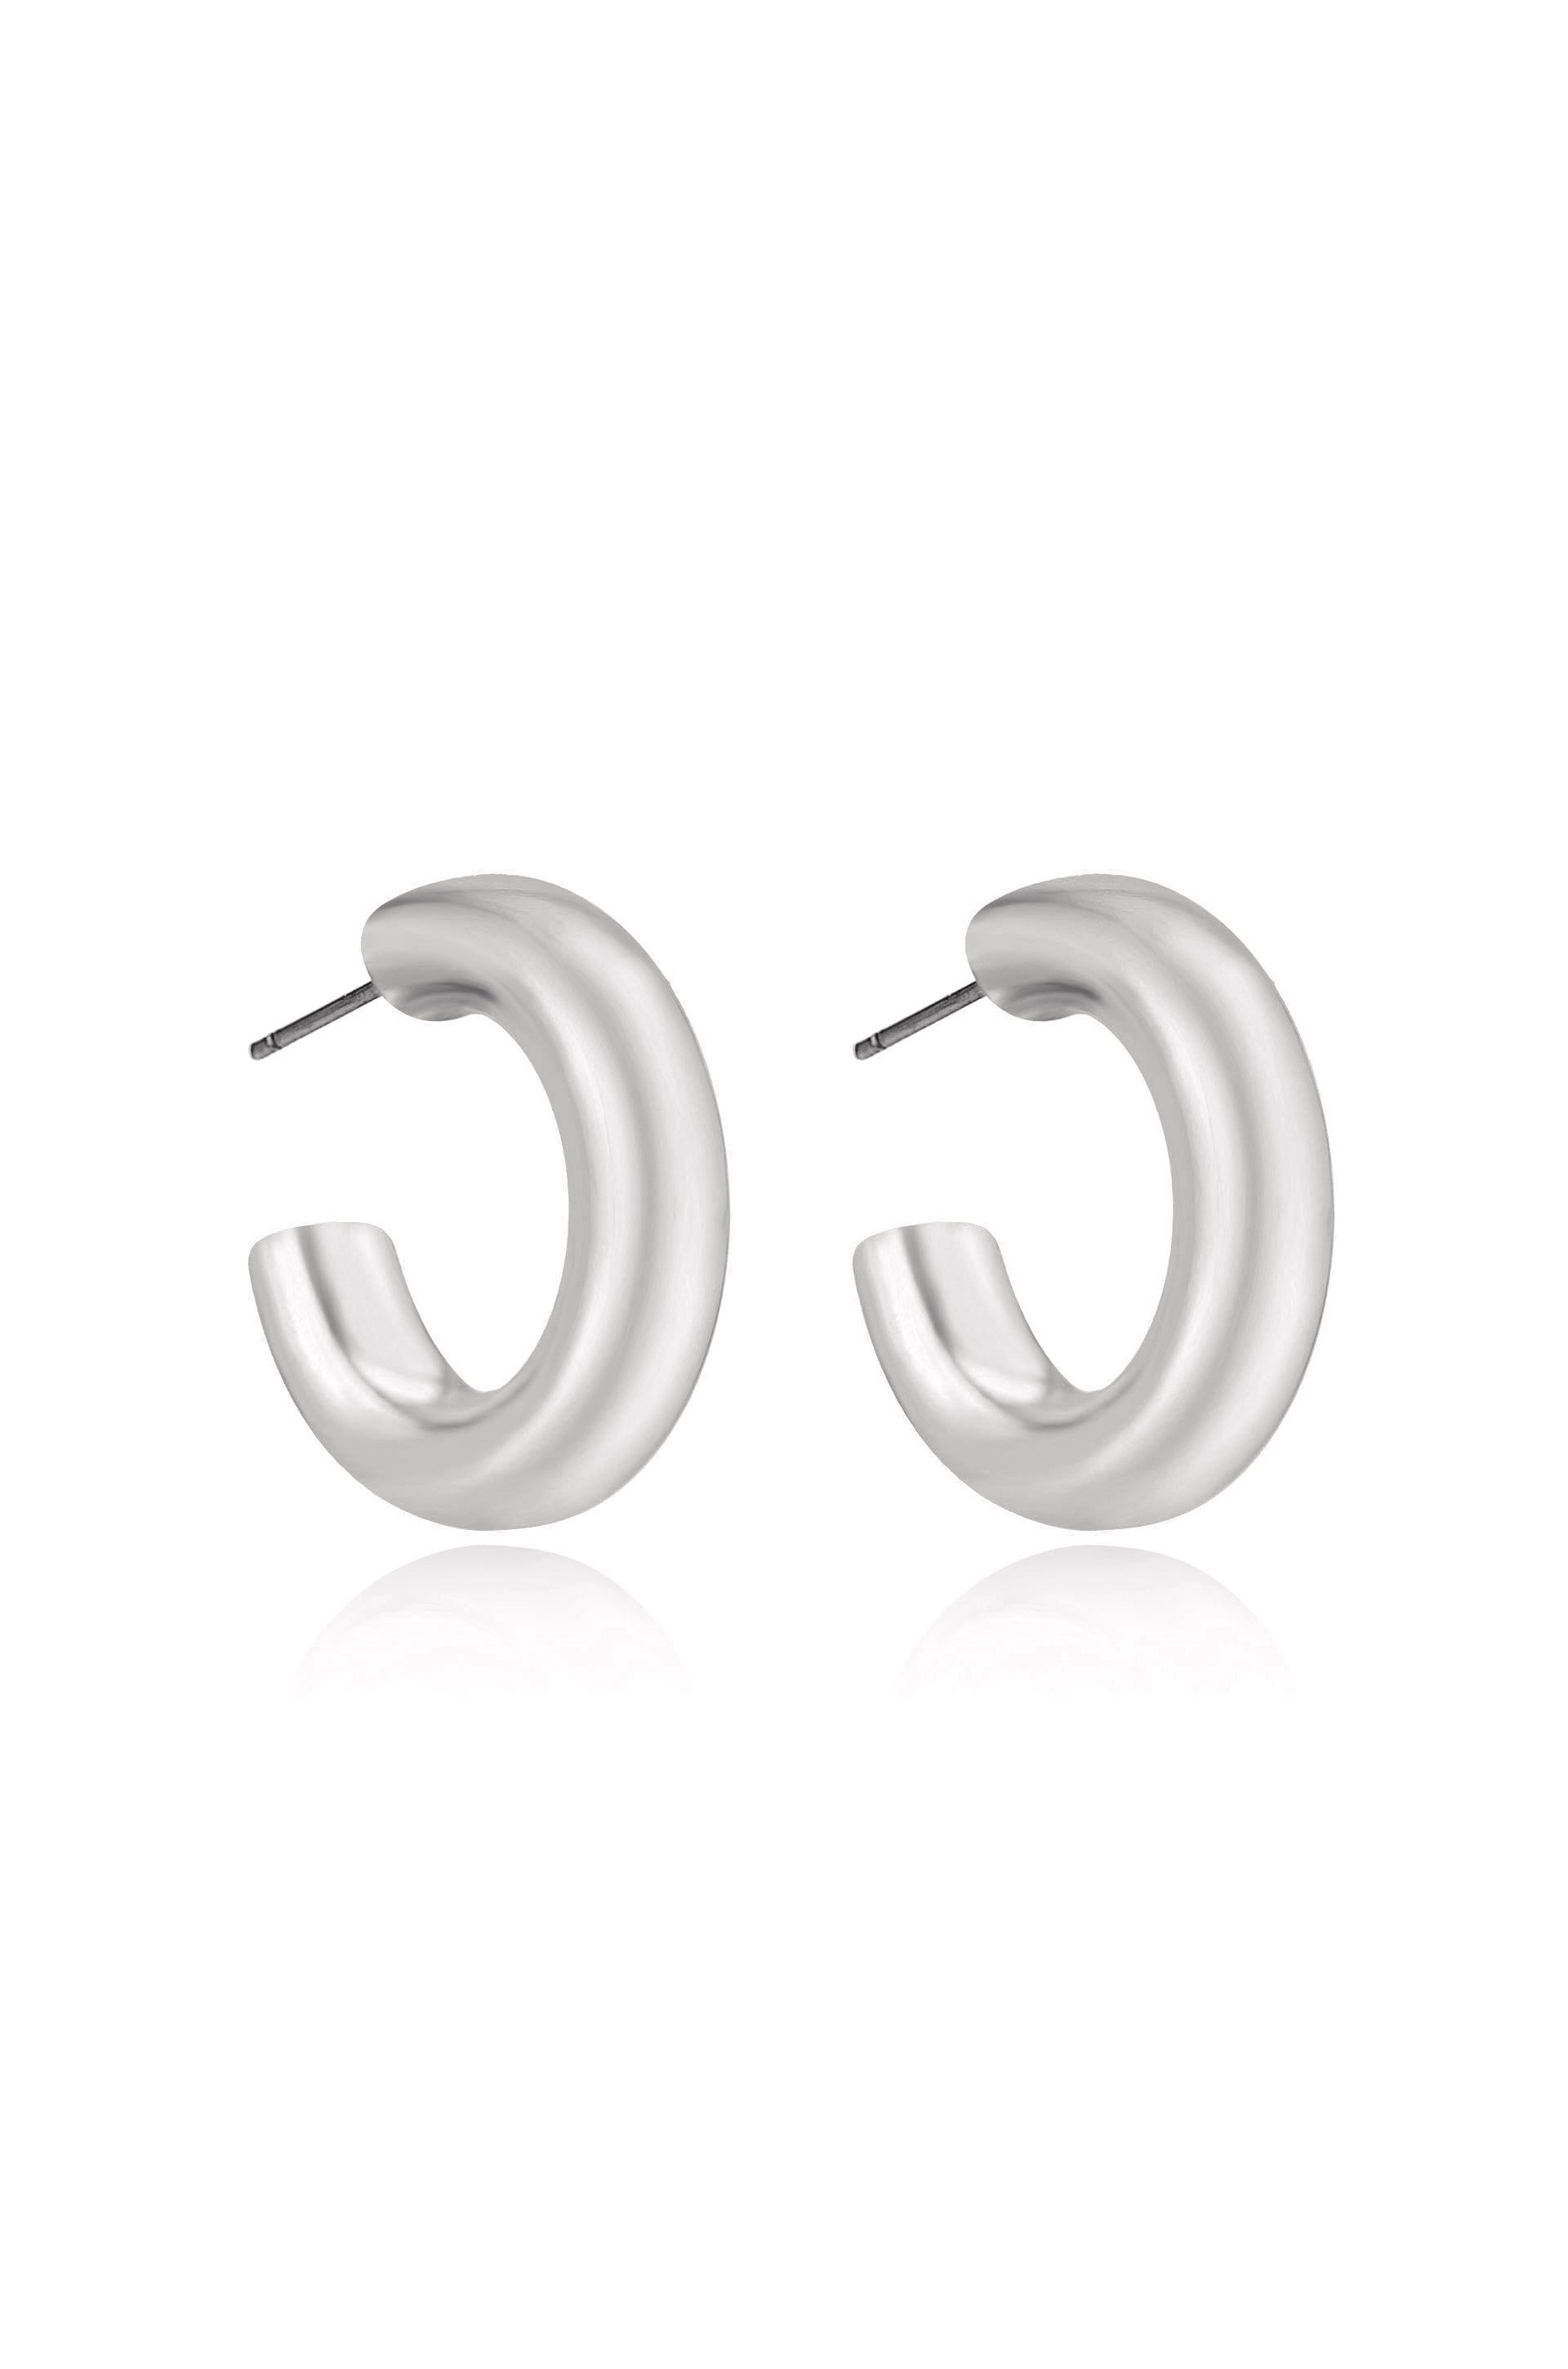 Thick Classic Hoops in small in rhodium side view